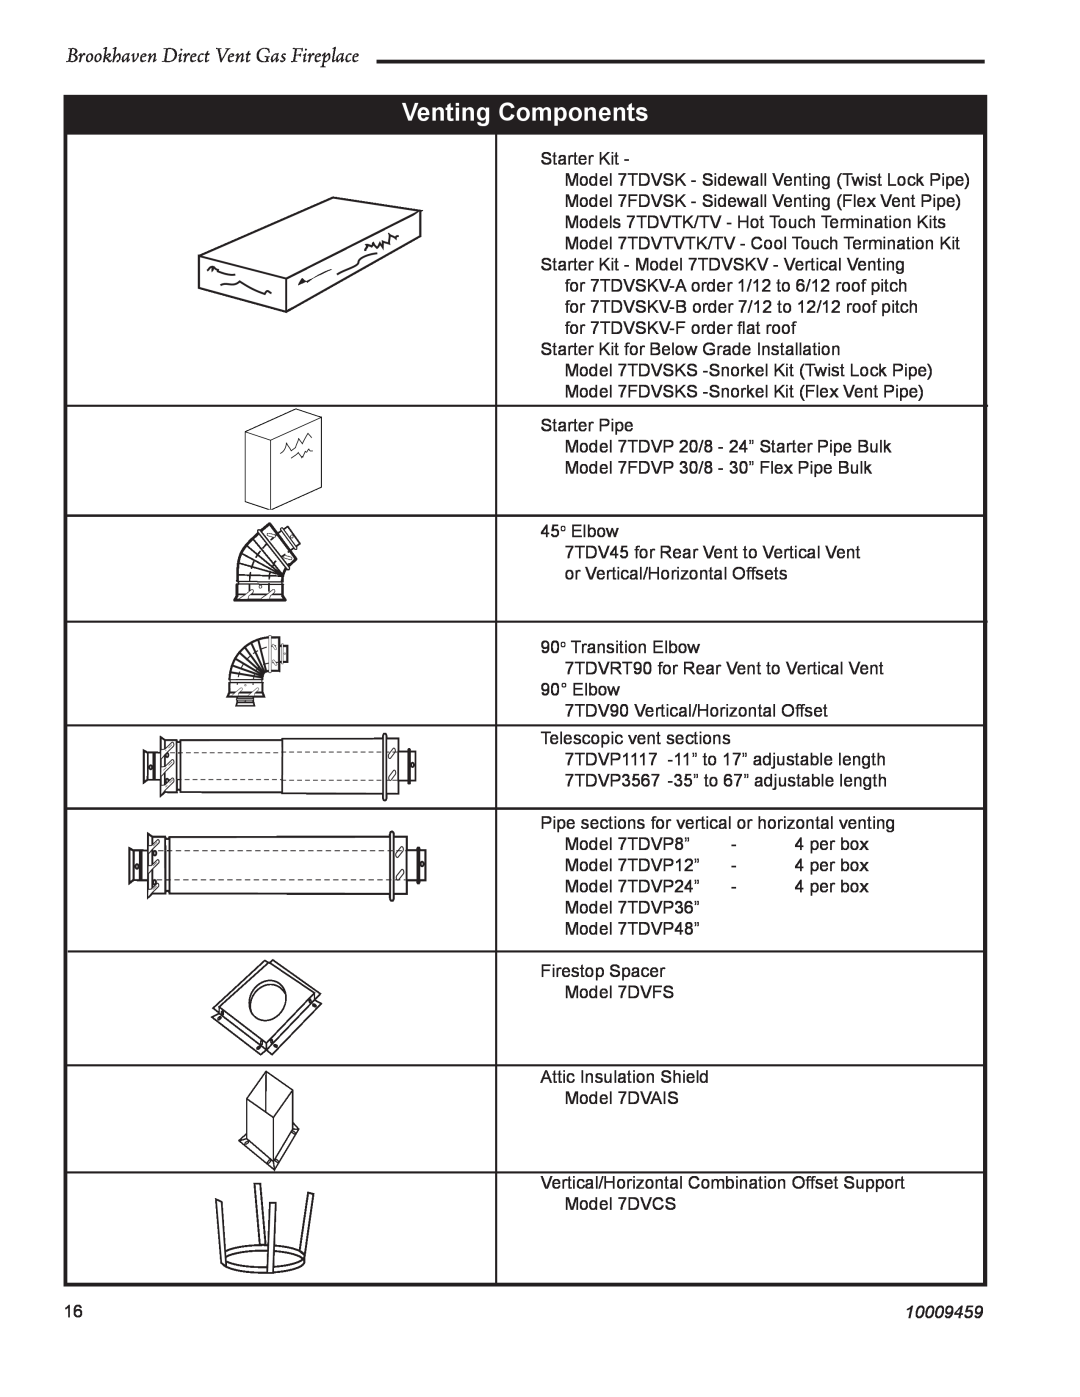 Vermont Casting 20DVT installation instructions Venting Components, Brookhaven Direct Vent Gas Fireplace, 10009459 